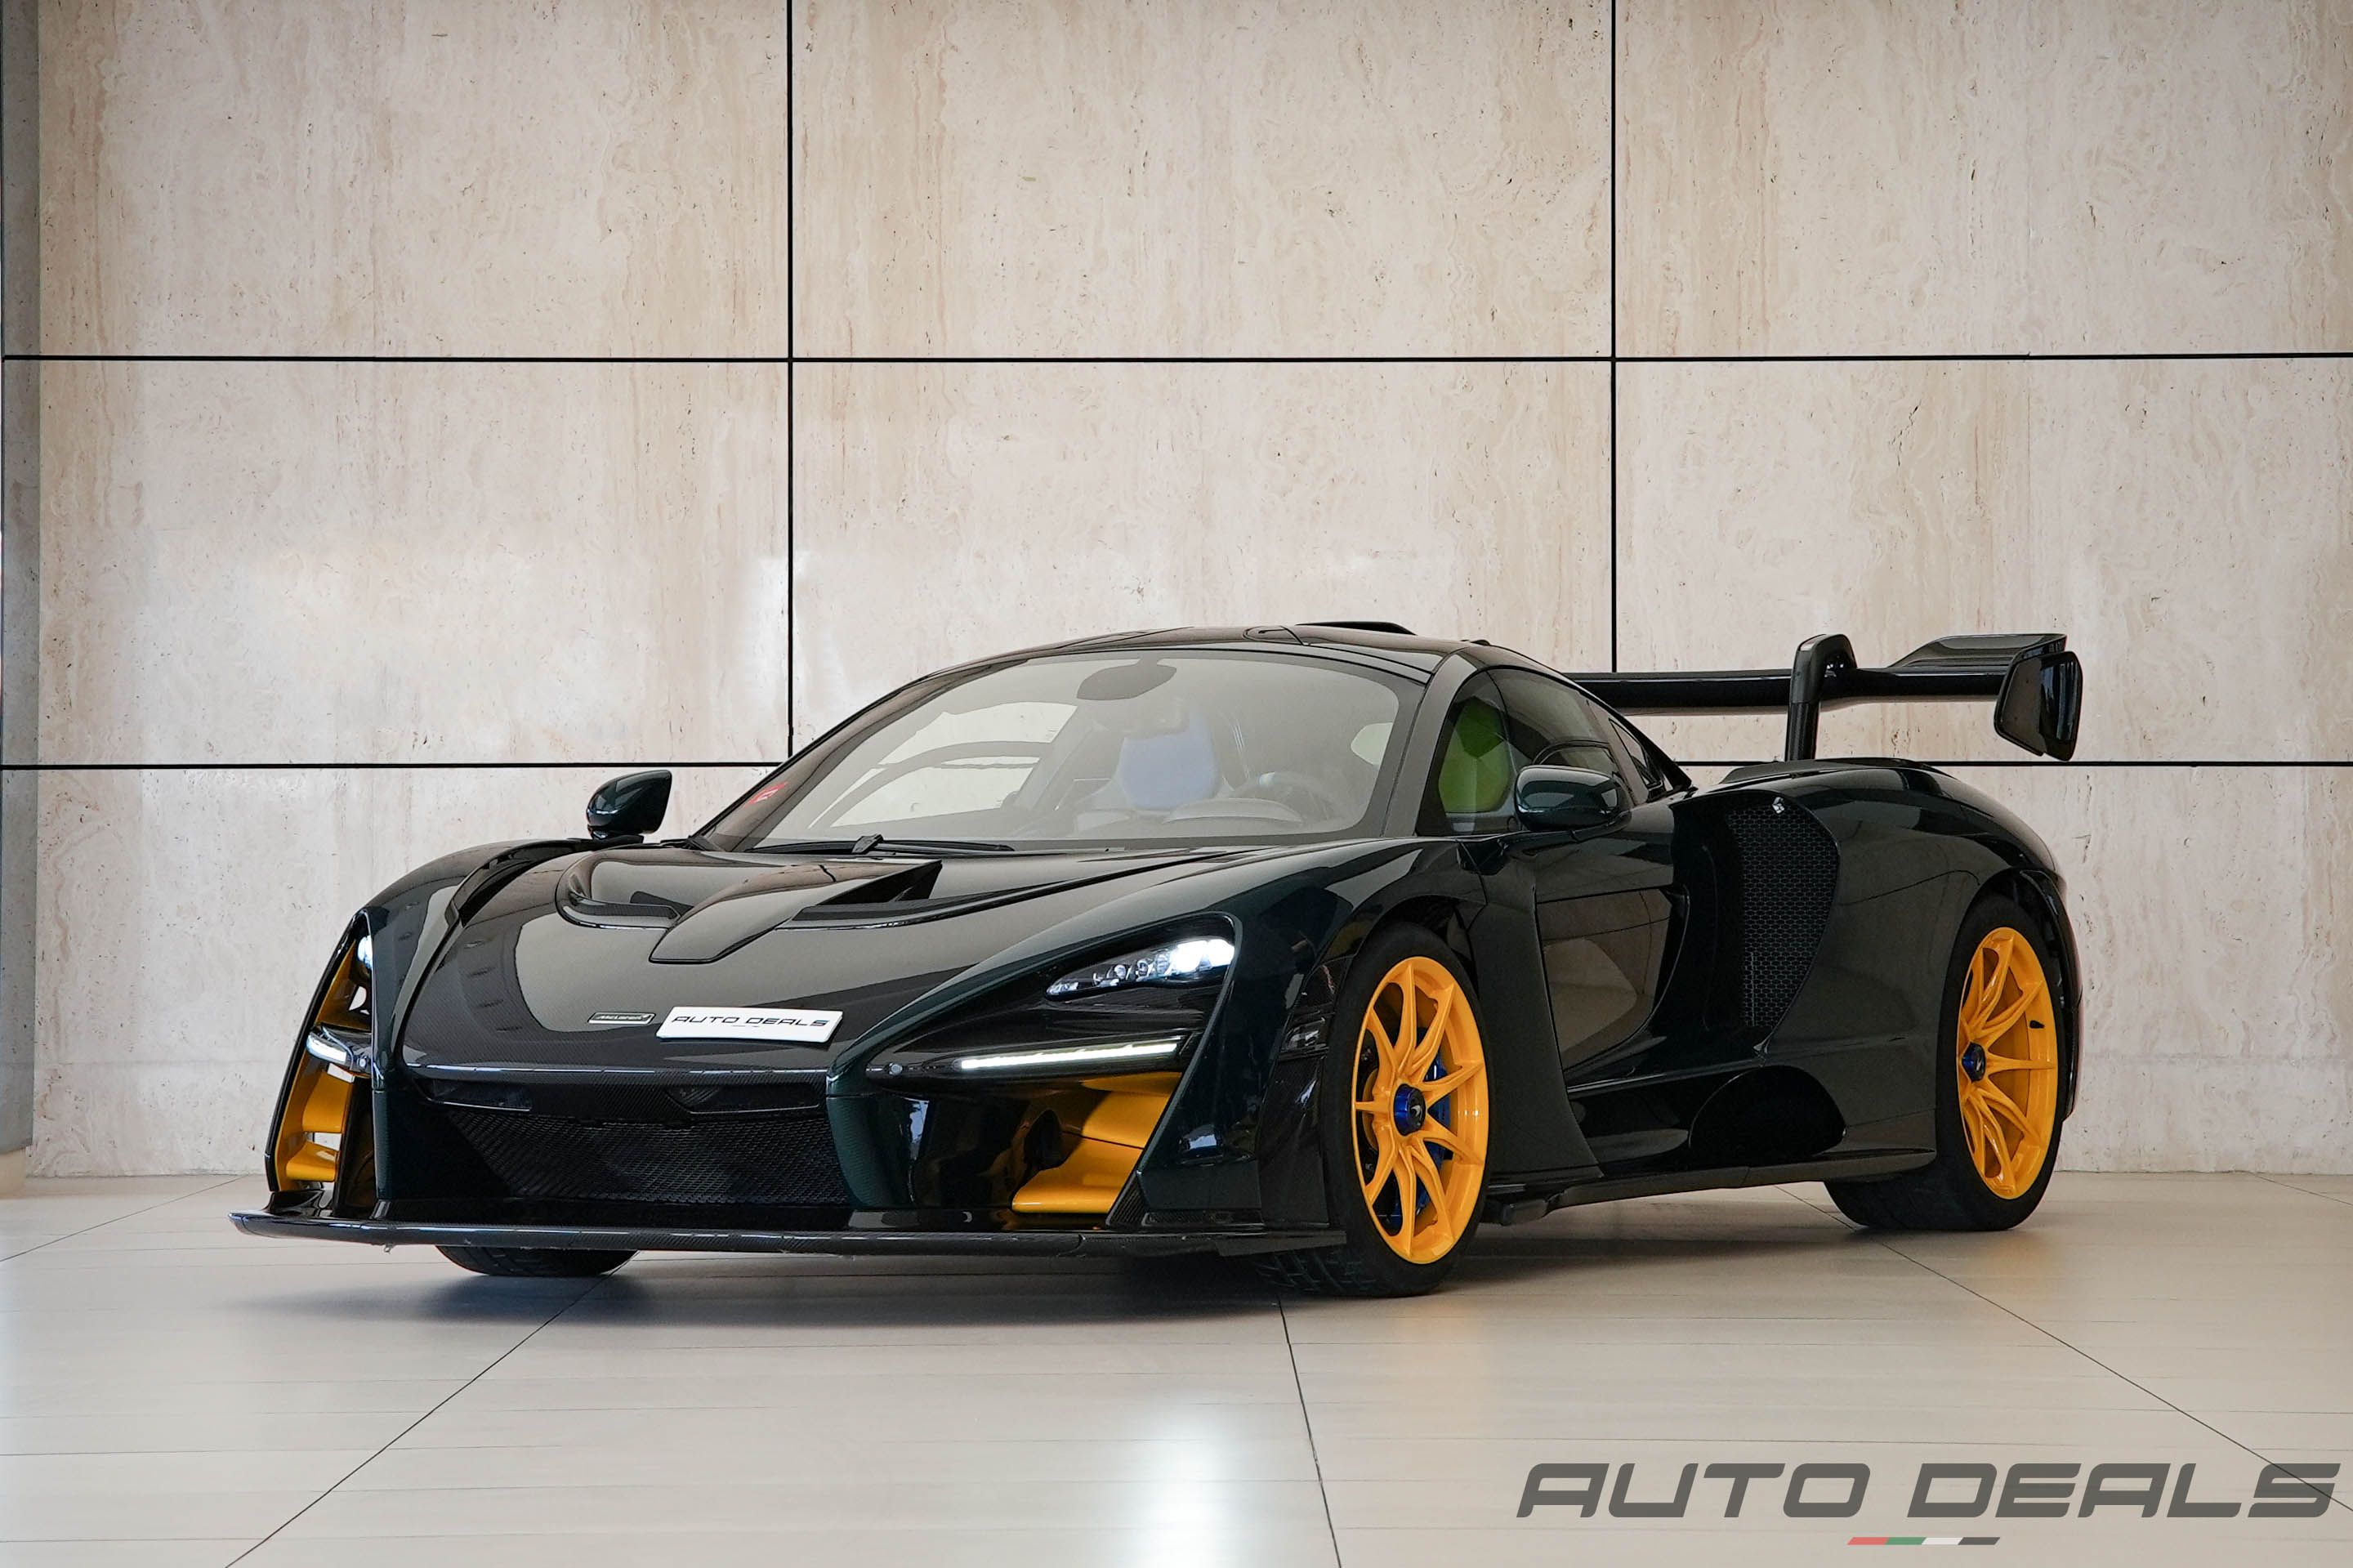 McLaren Senna | 2019 - Extremely Low Mileage - Best in Class - Pristine Condition - Well Maintained | 4.0L V8